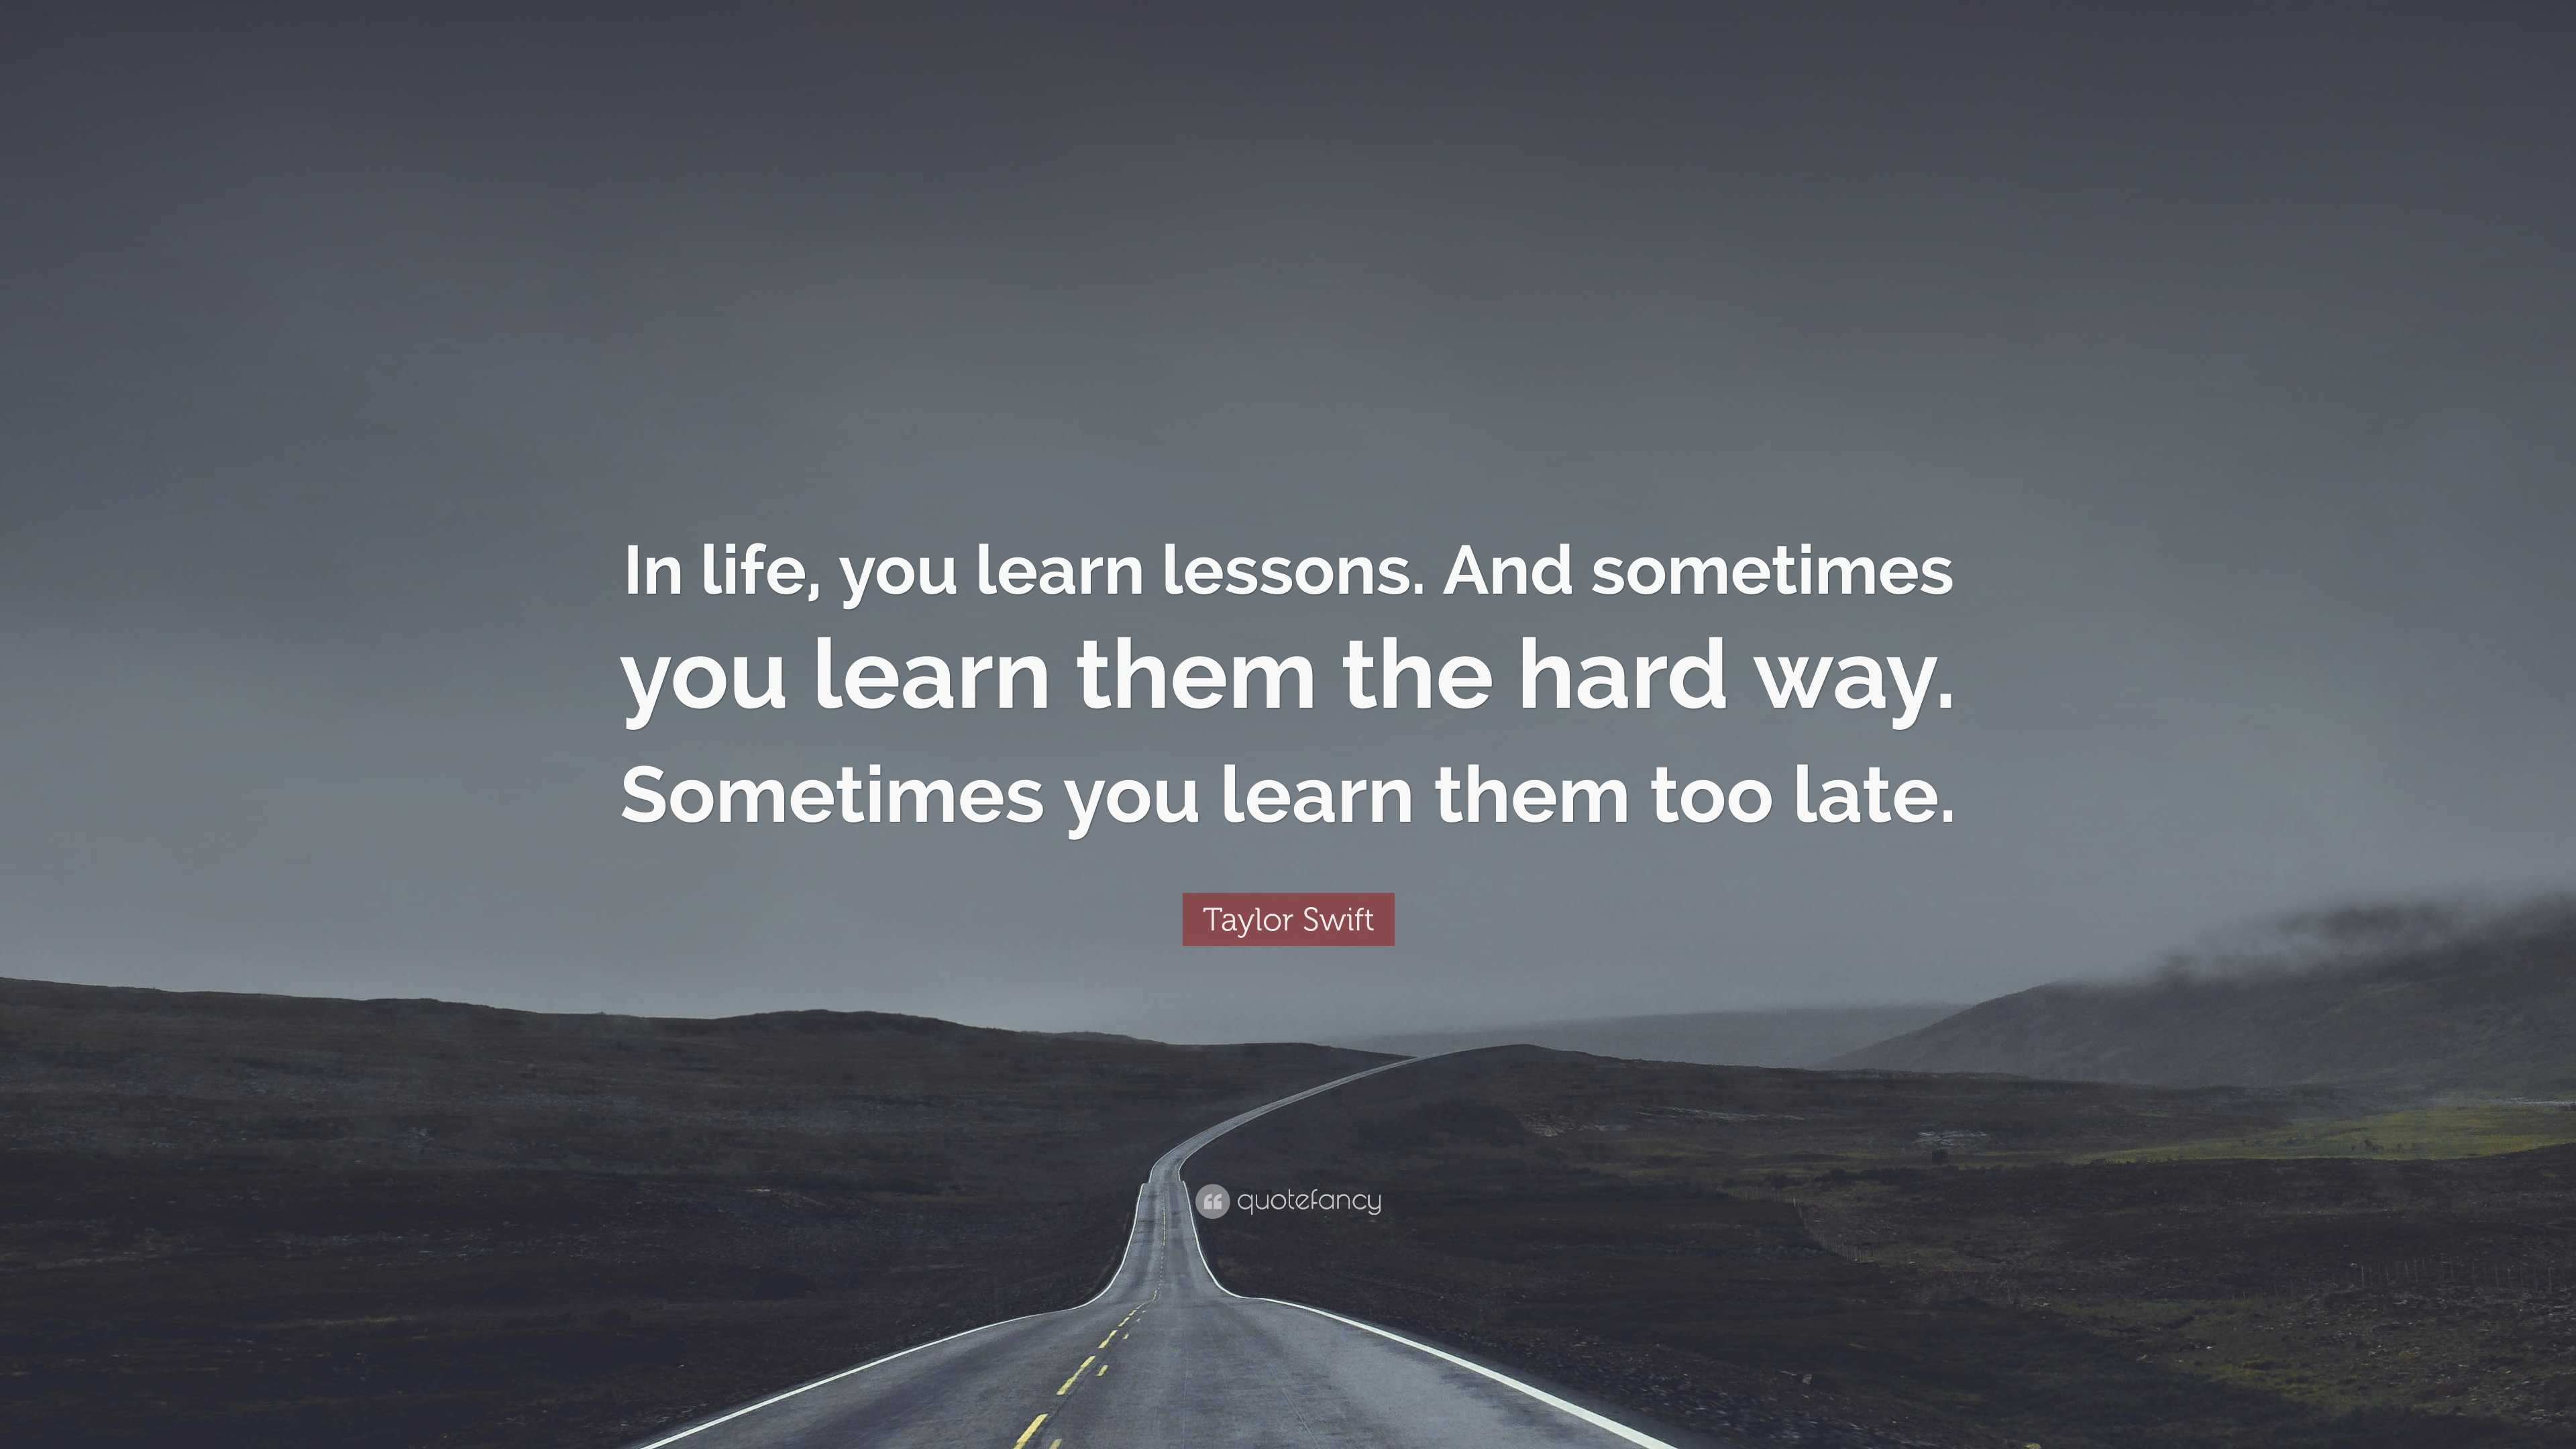 Learning The Hard Way Quotes. QuotesGram